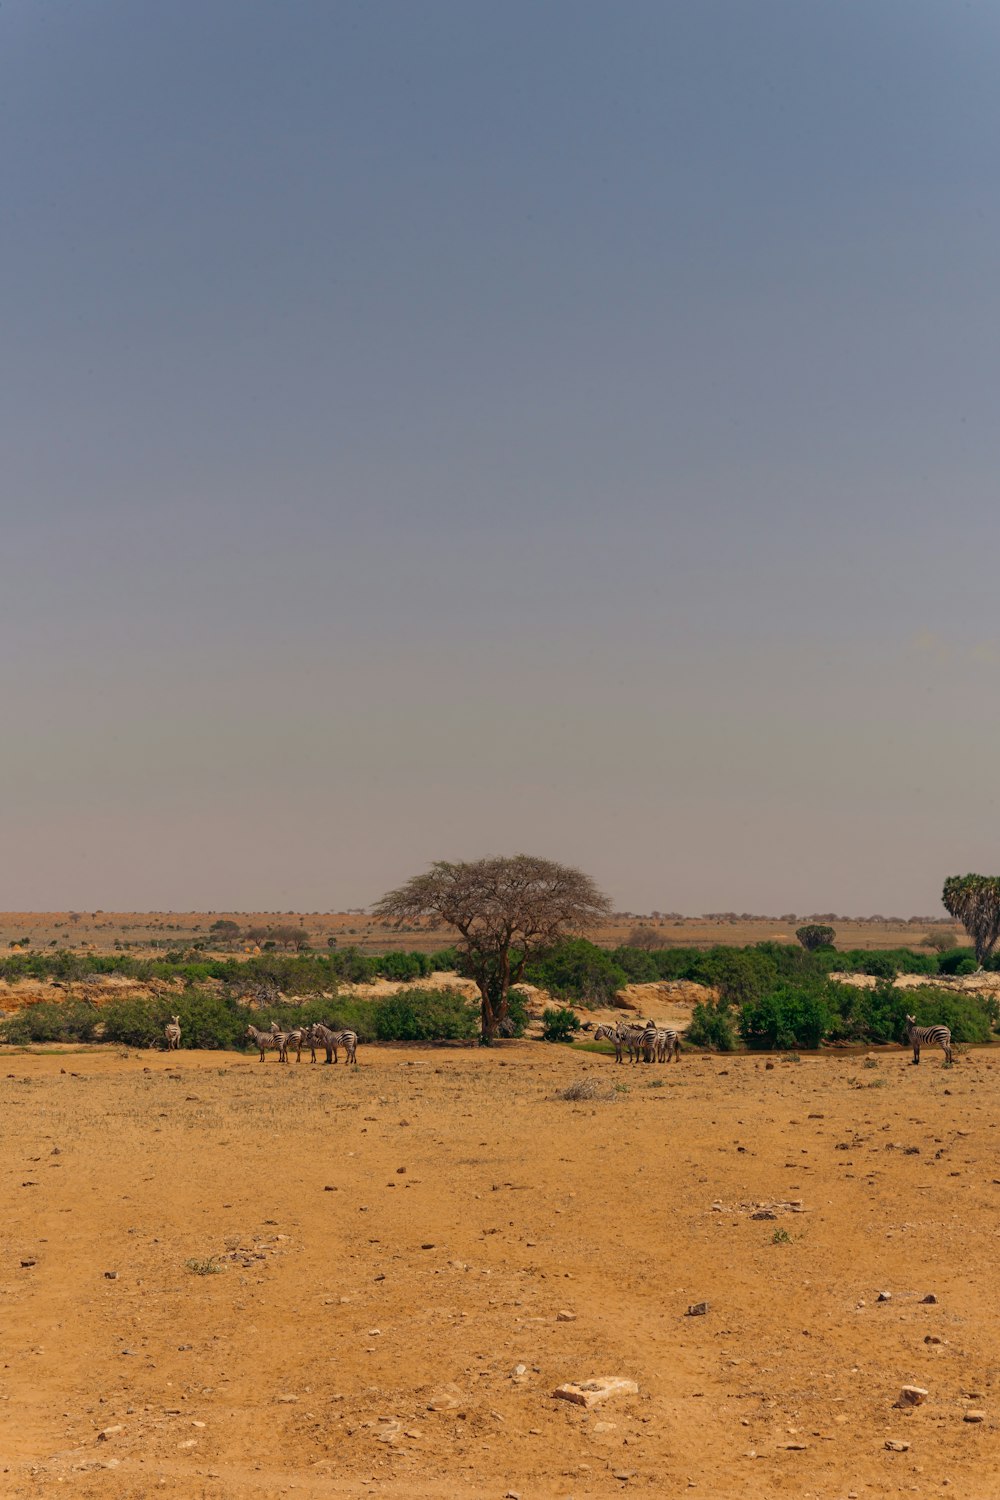 a herd of animals walking across a dry grass covered field